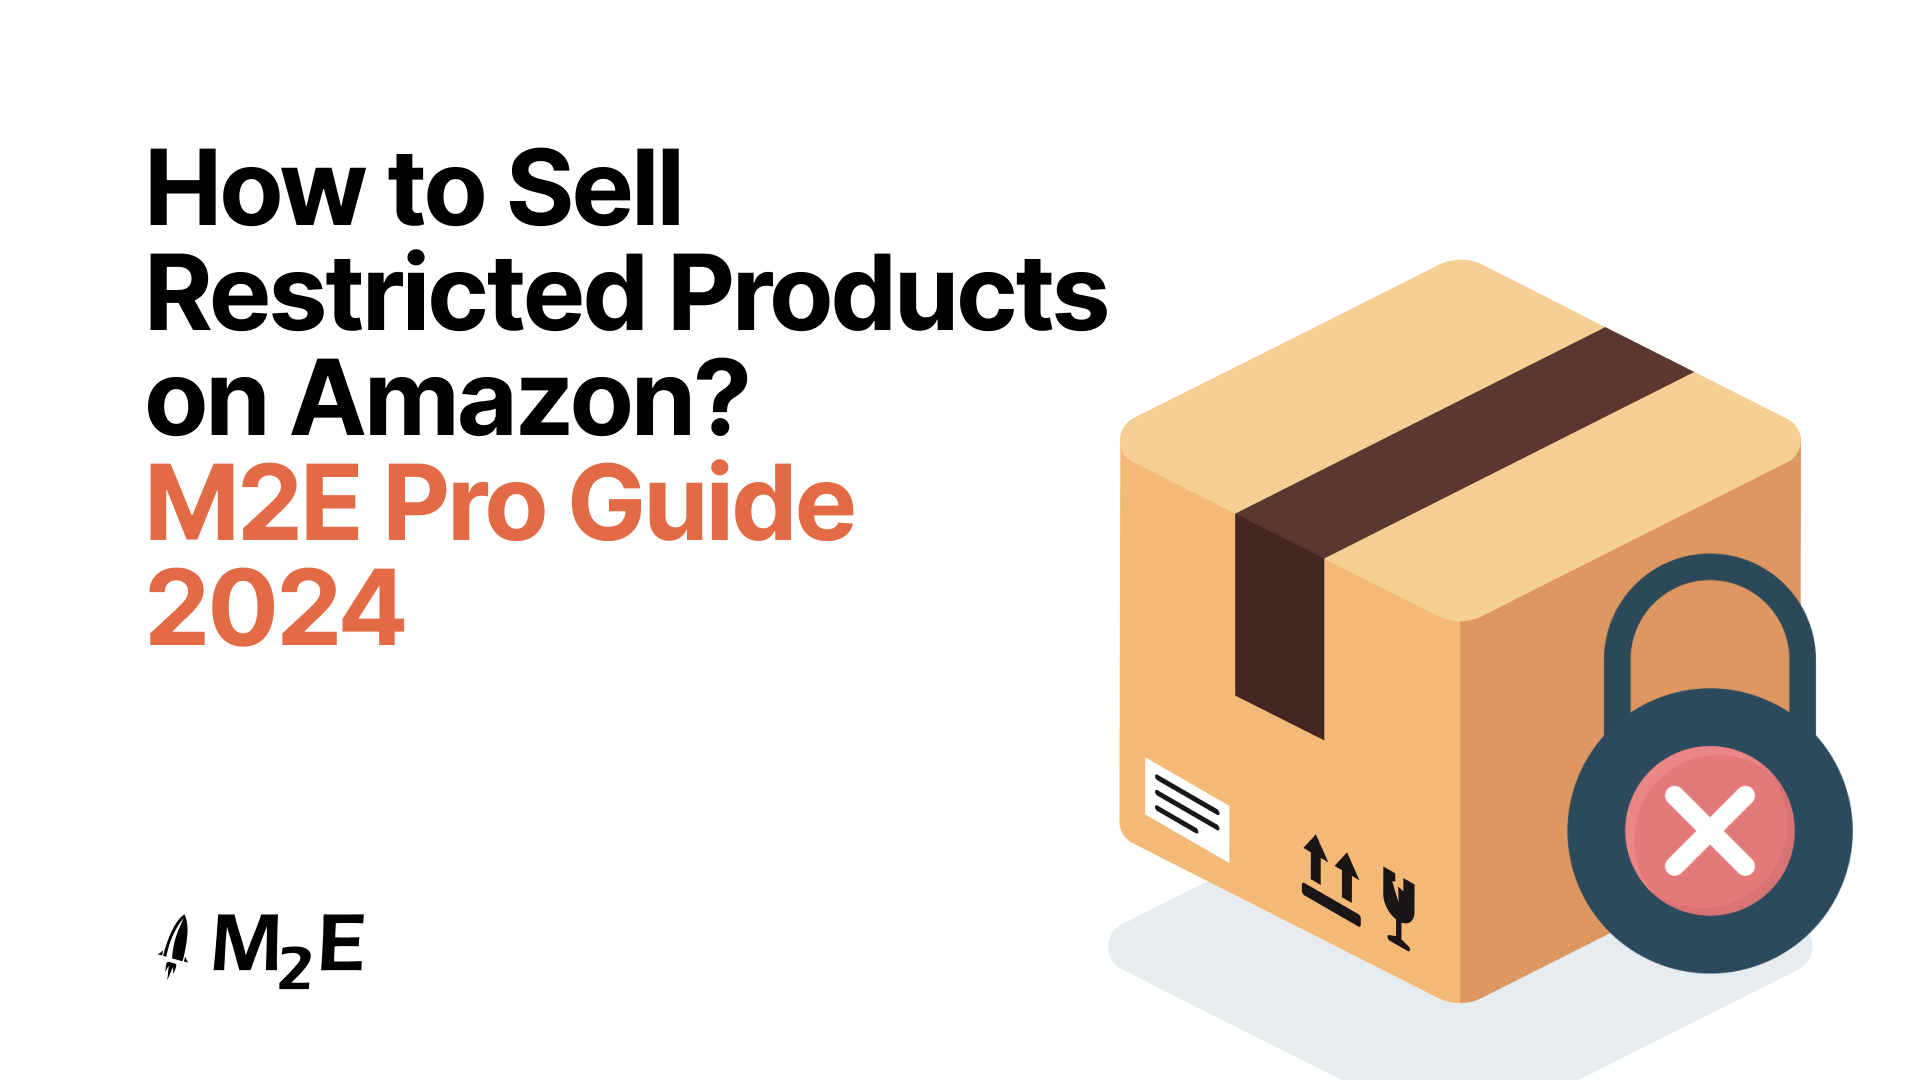 How to Sell Restricted Products on Amazon? M2E Pro Guide 2024